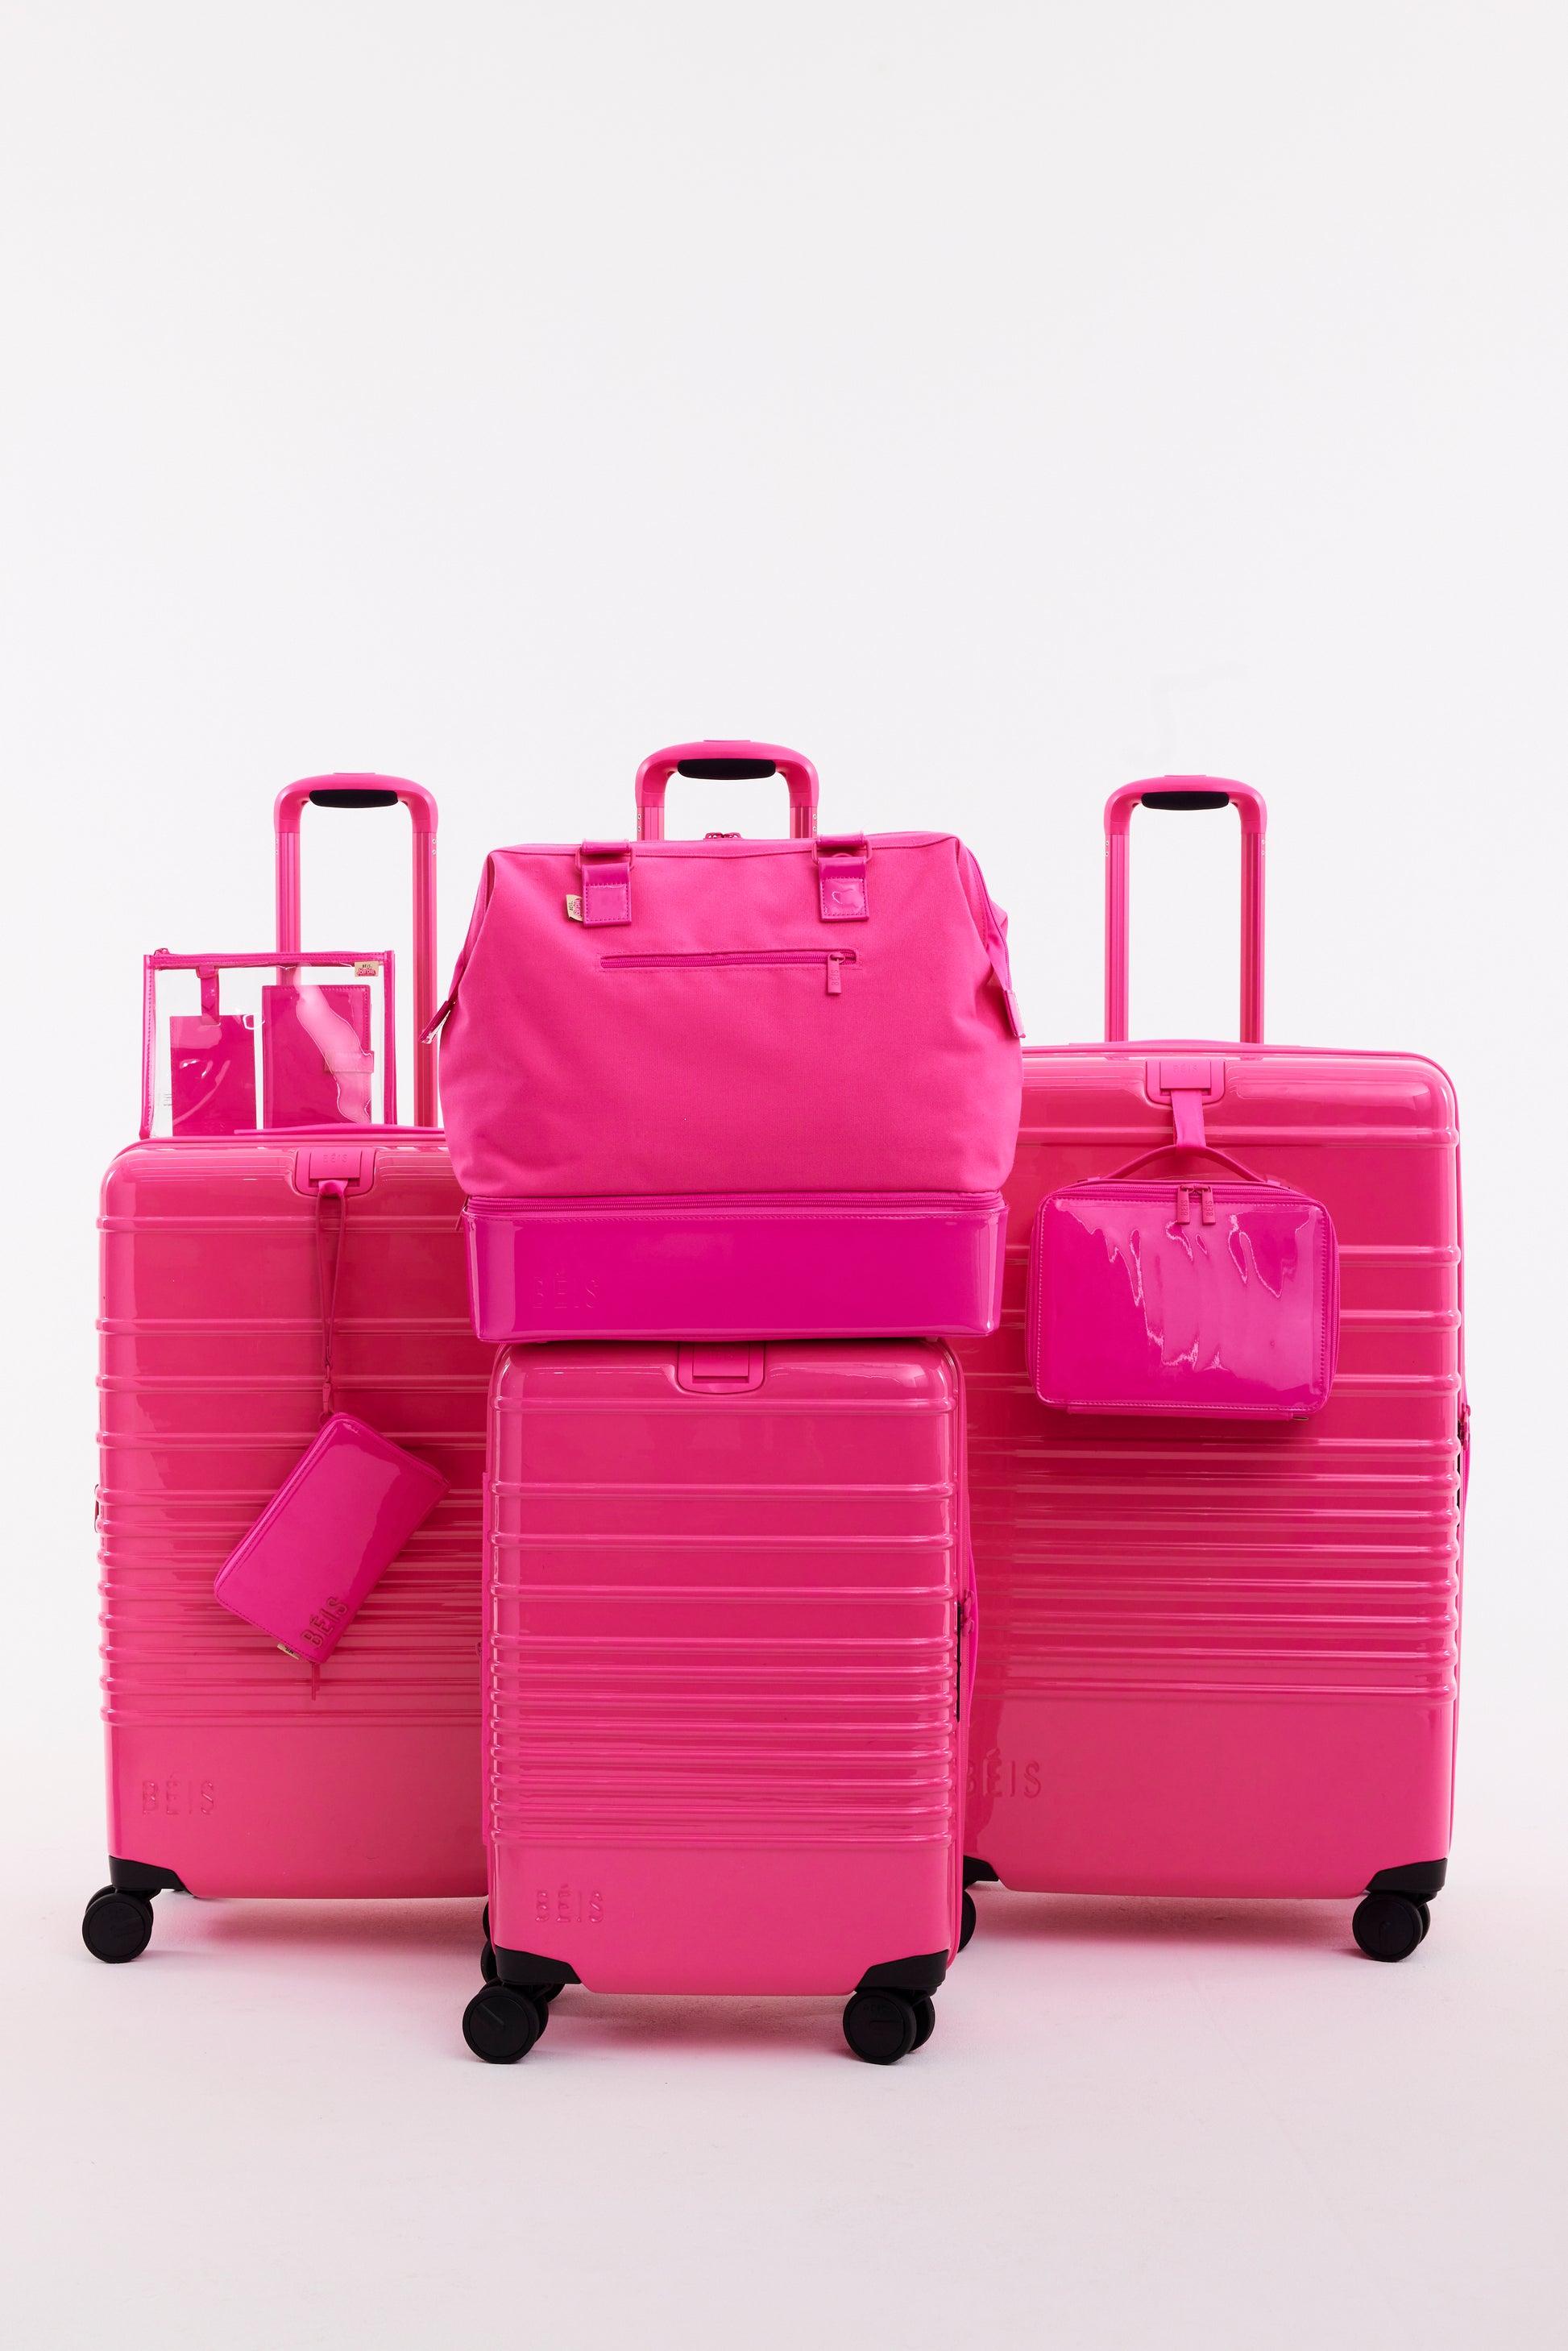 This Barbie Luggage Set Is on Sale at